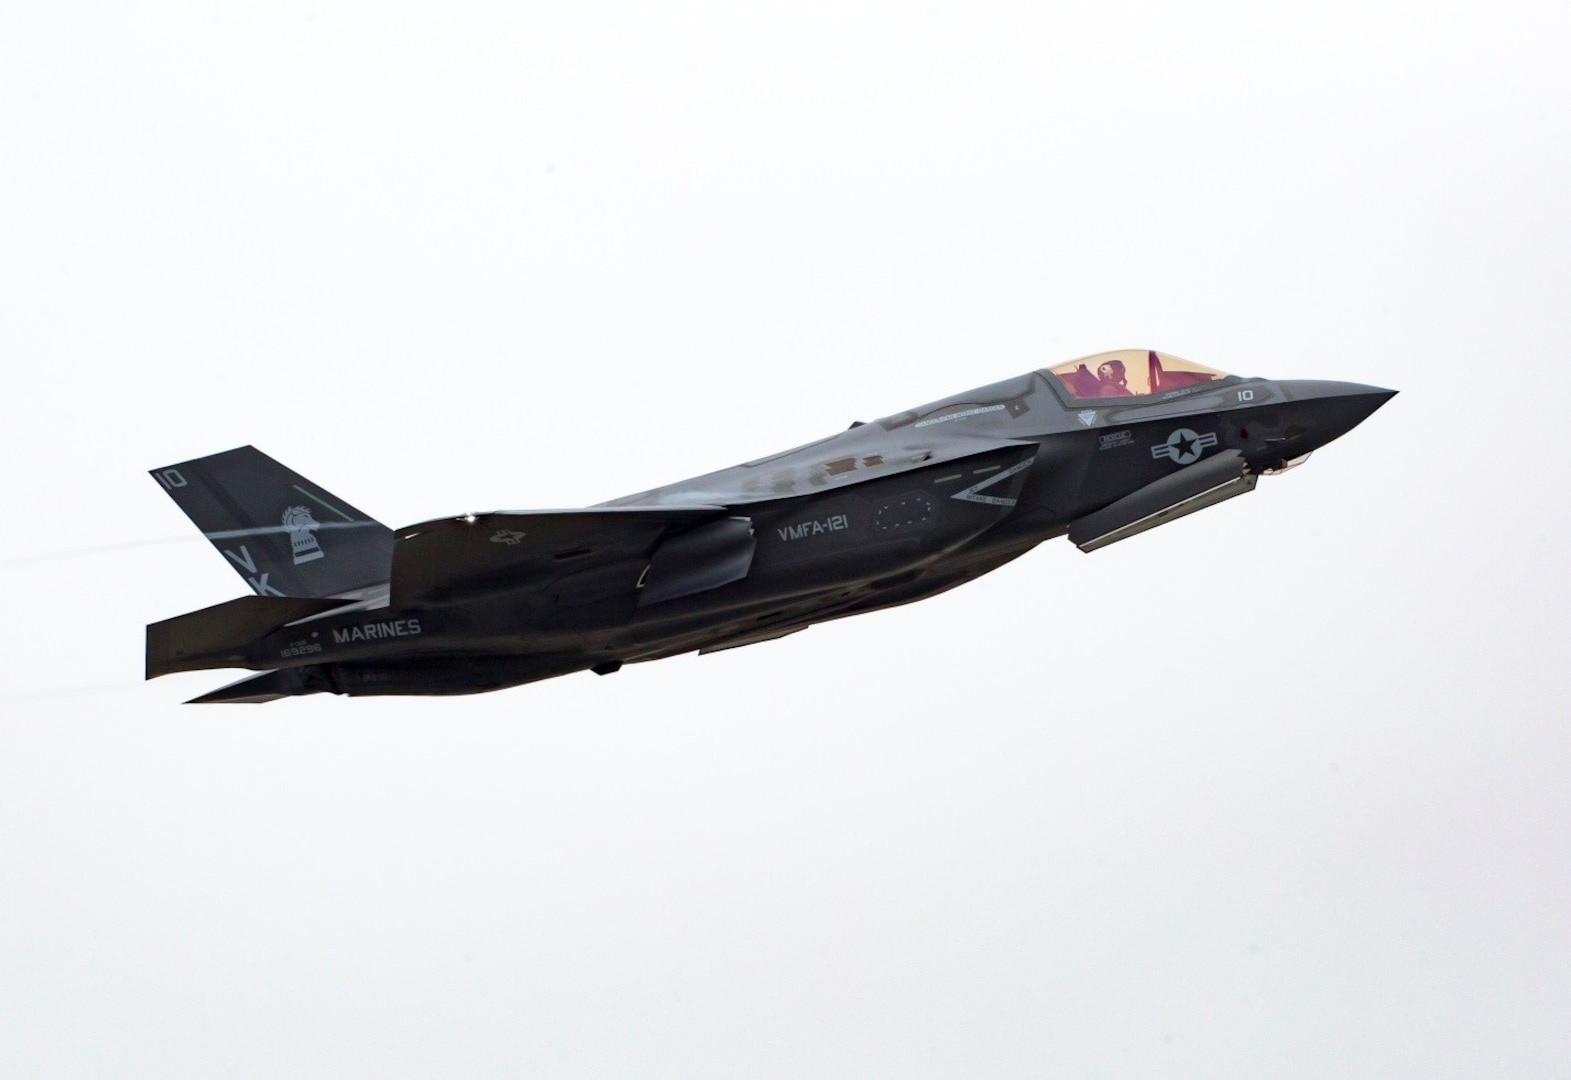 A U.S. Marine Corps F-35B Lightning II with Marine Fighter Attack Squadron (VMFA) 121, takes off from Marine Corps Air Station Iwakuni, Japan, March 23, 2017. VMFA-121 aims to fill close air support missions in support of 5th Anglico for the Korea Marine Exercise Program (KMEP) 17-5 in the Republic of Korea (ROK) later this month.  The Marine Corps will continue to support the ROK-U.S. alliance with the most advanced aircraft platforms in their inventory.  